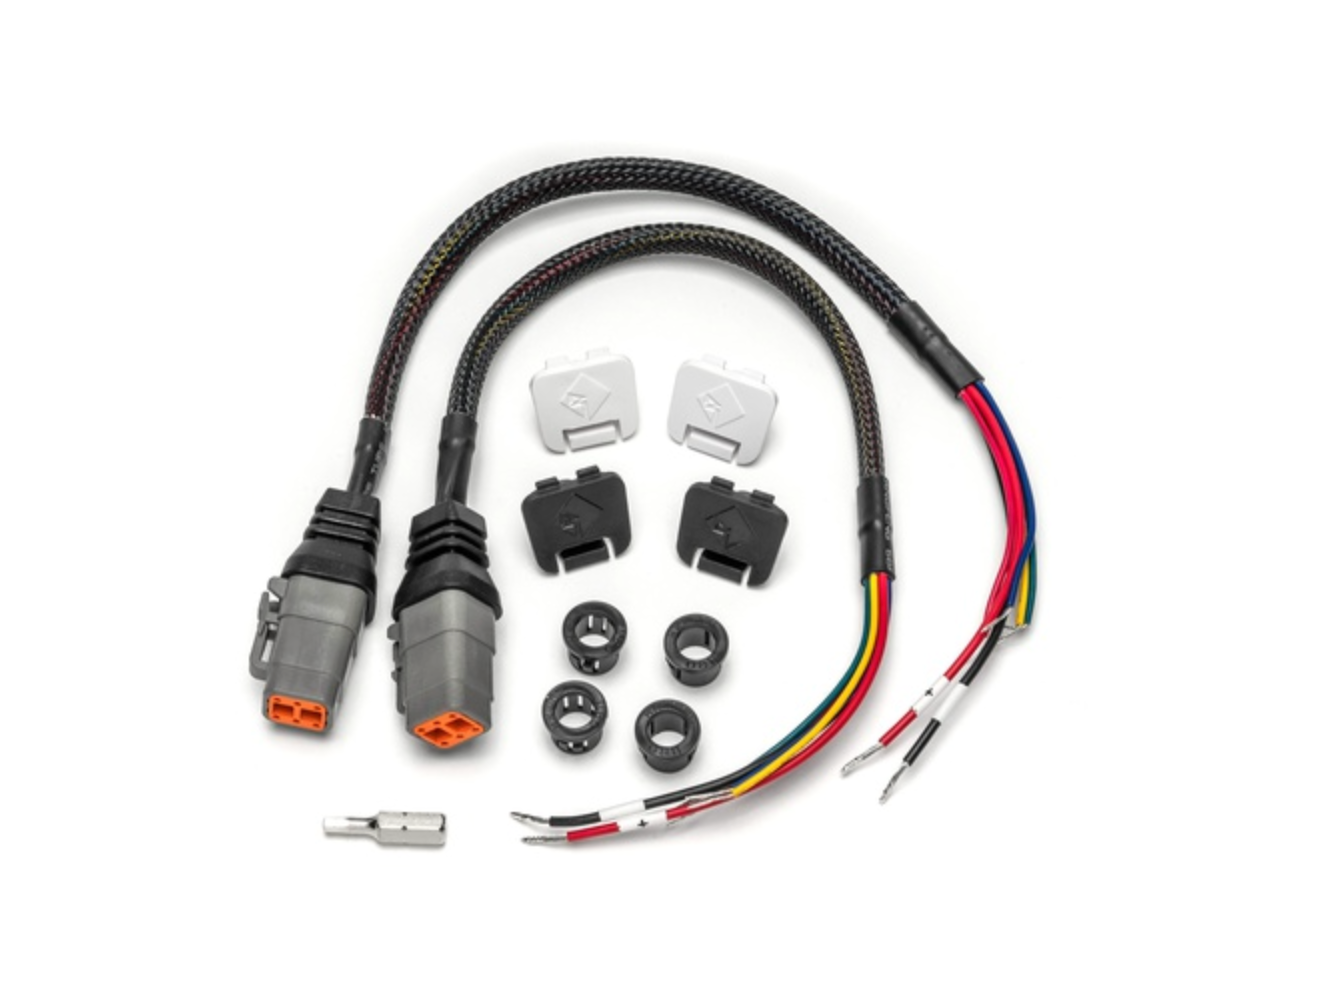 Replacement 6-Pin Harness Kit for Gen-2 Wake Tower Speakers P/N: 1130-73416-C1